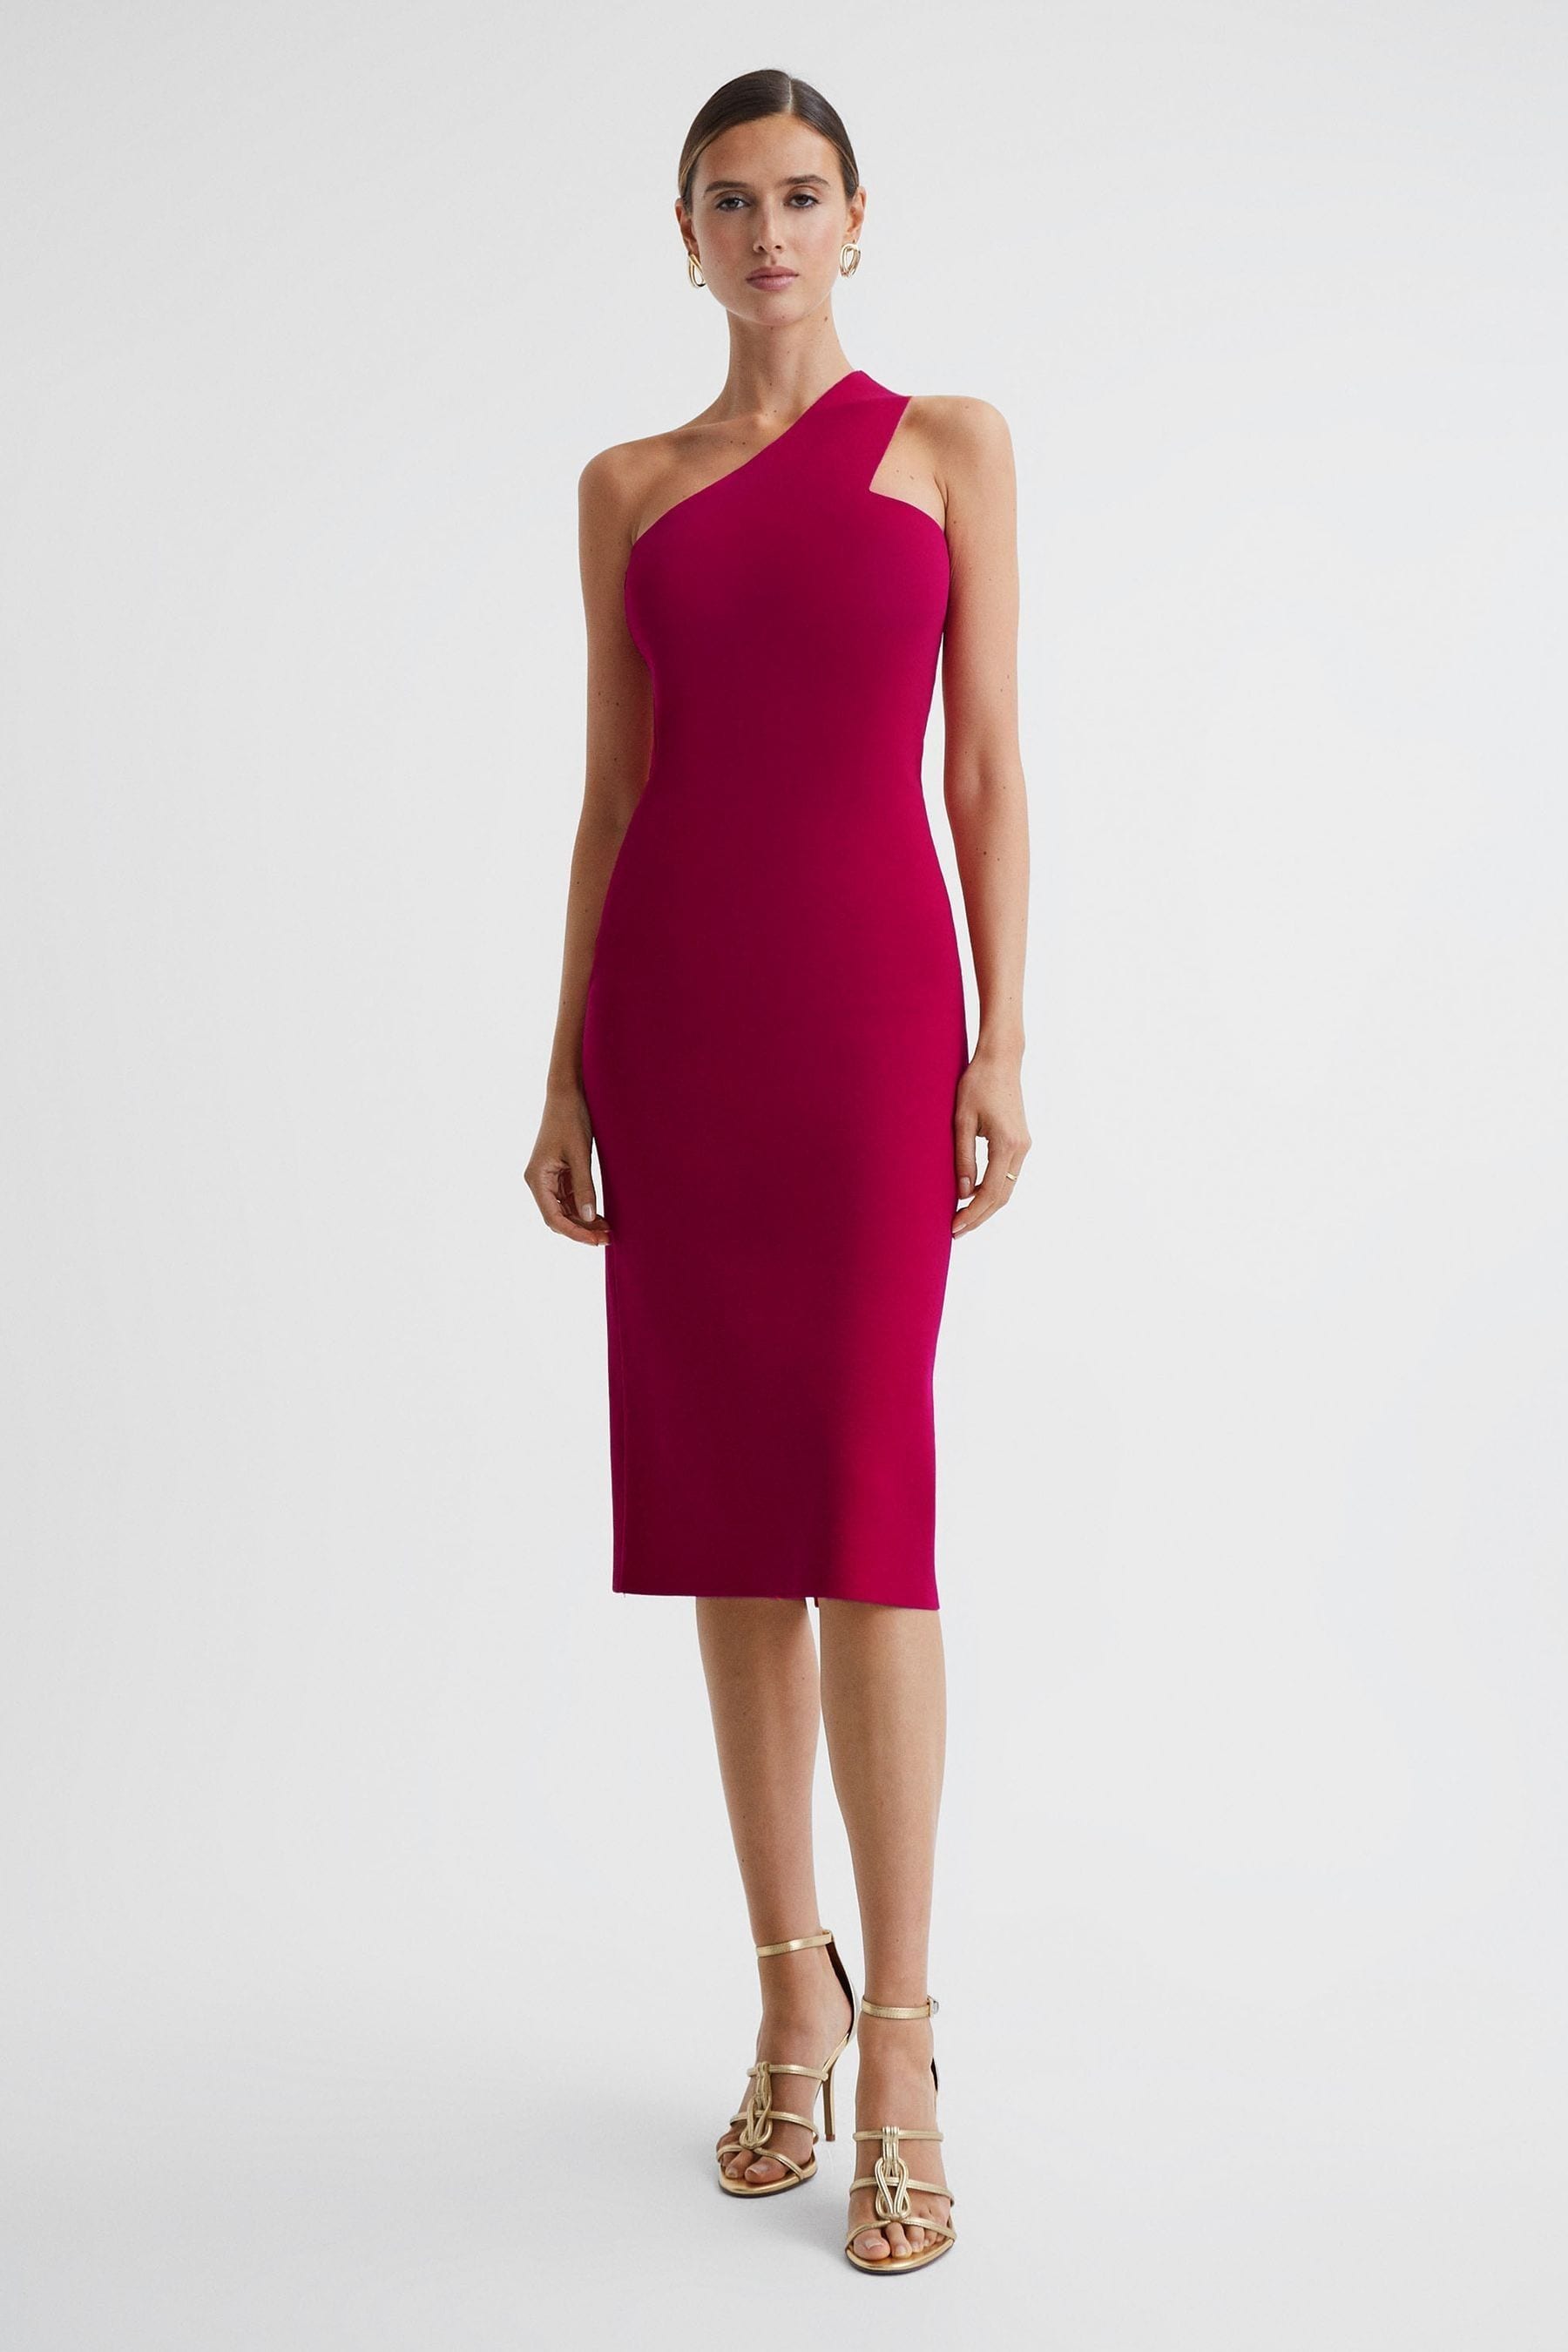 Reiss Lola - Pink Knitted One Shoulder Bodycon Midi Dress, S